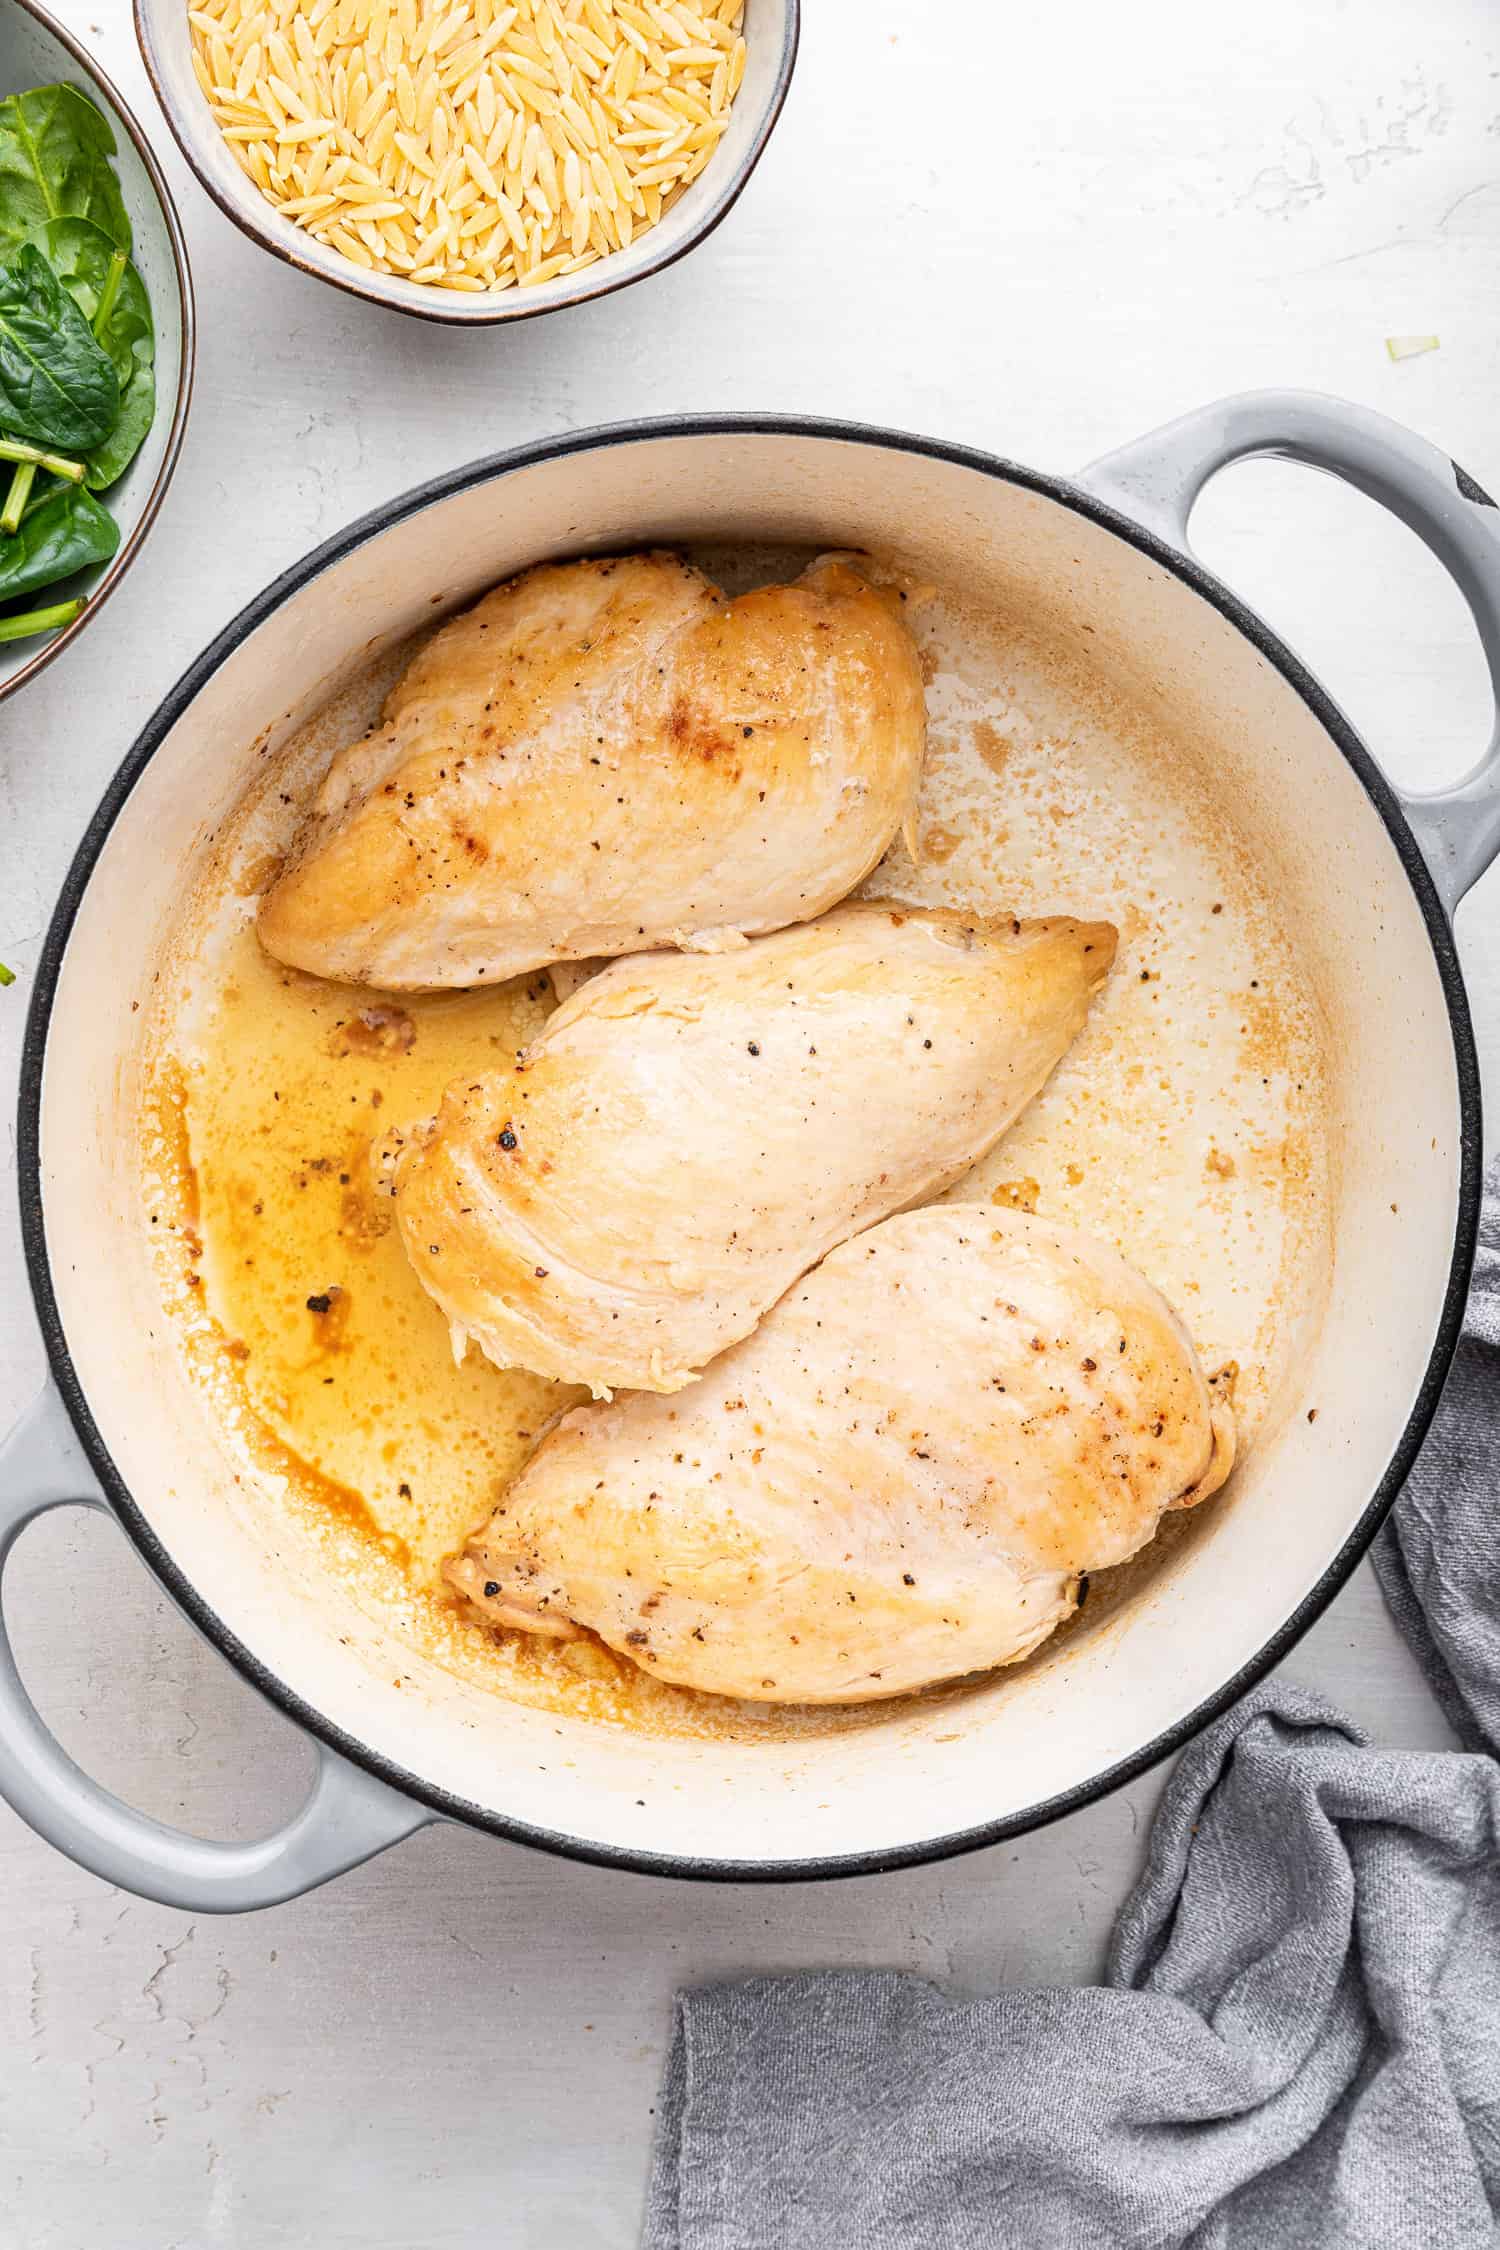 Chicken breasts cooking in pot.